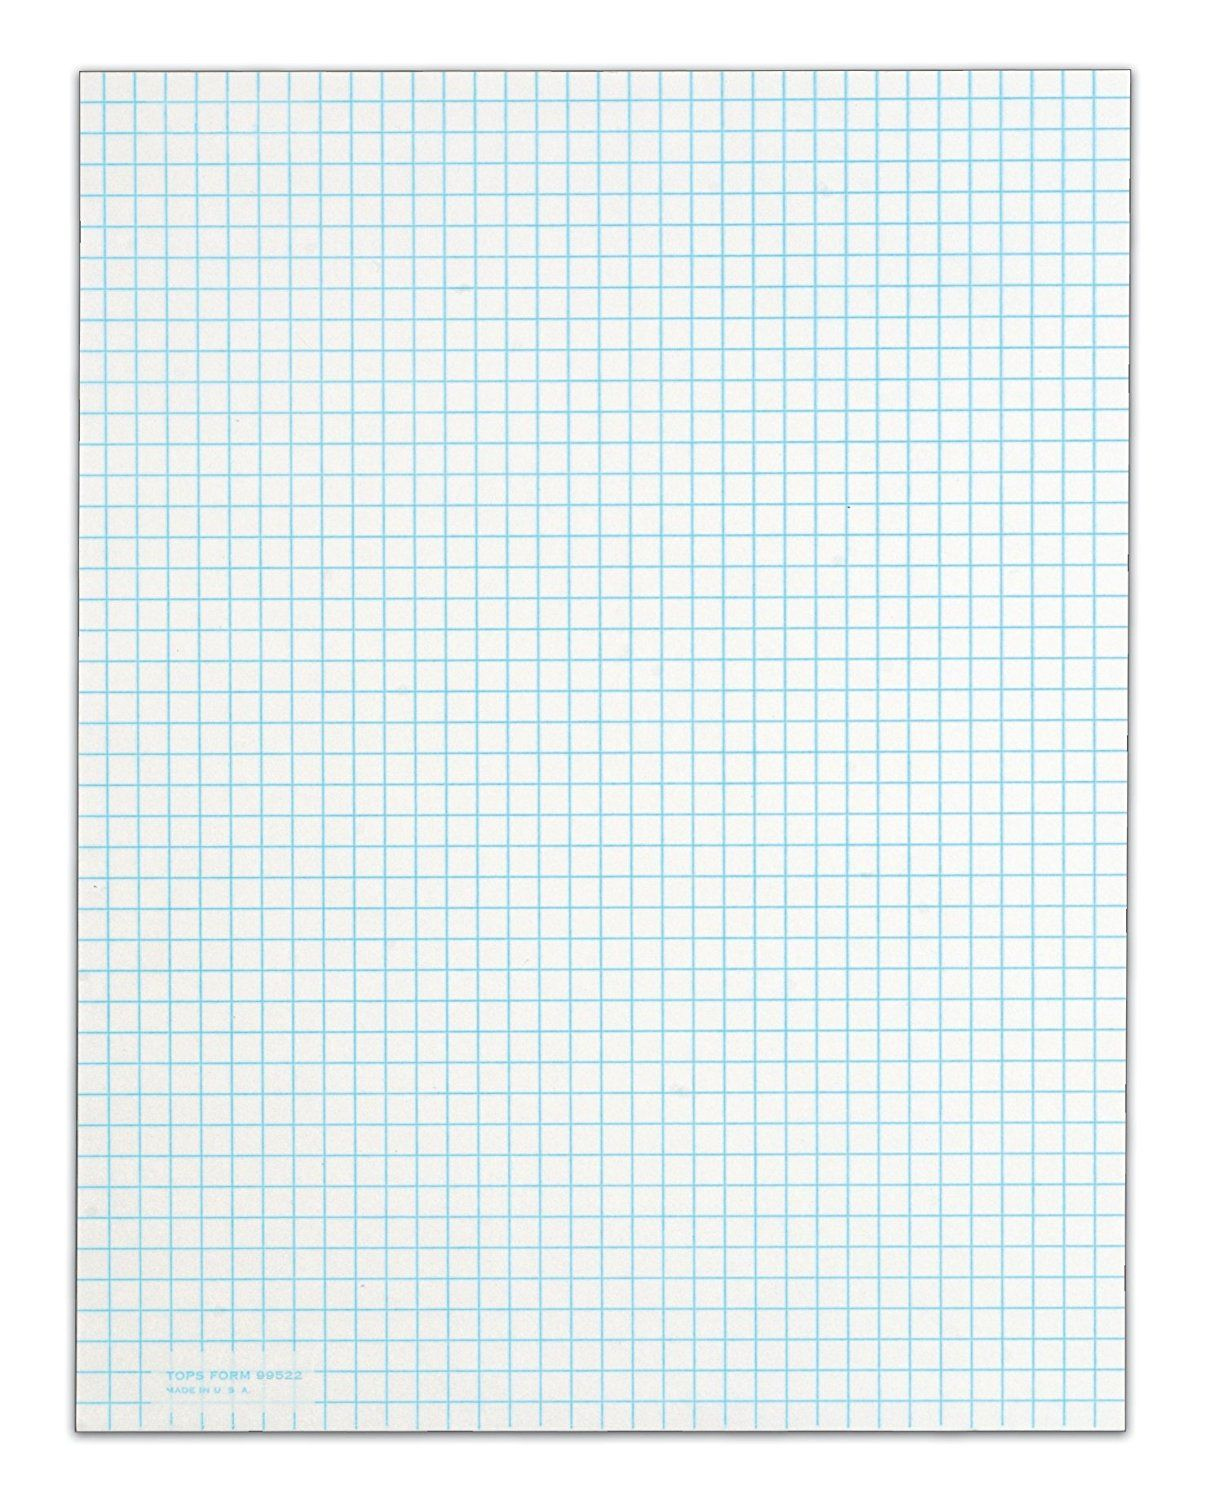 Graph Paper Template 8 5 X 11 Yahoo Image Search Results Printable